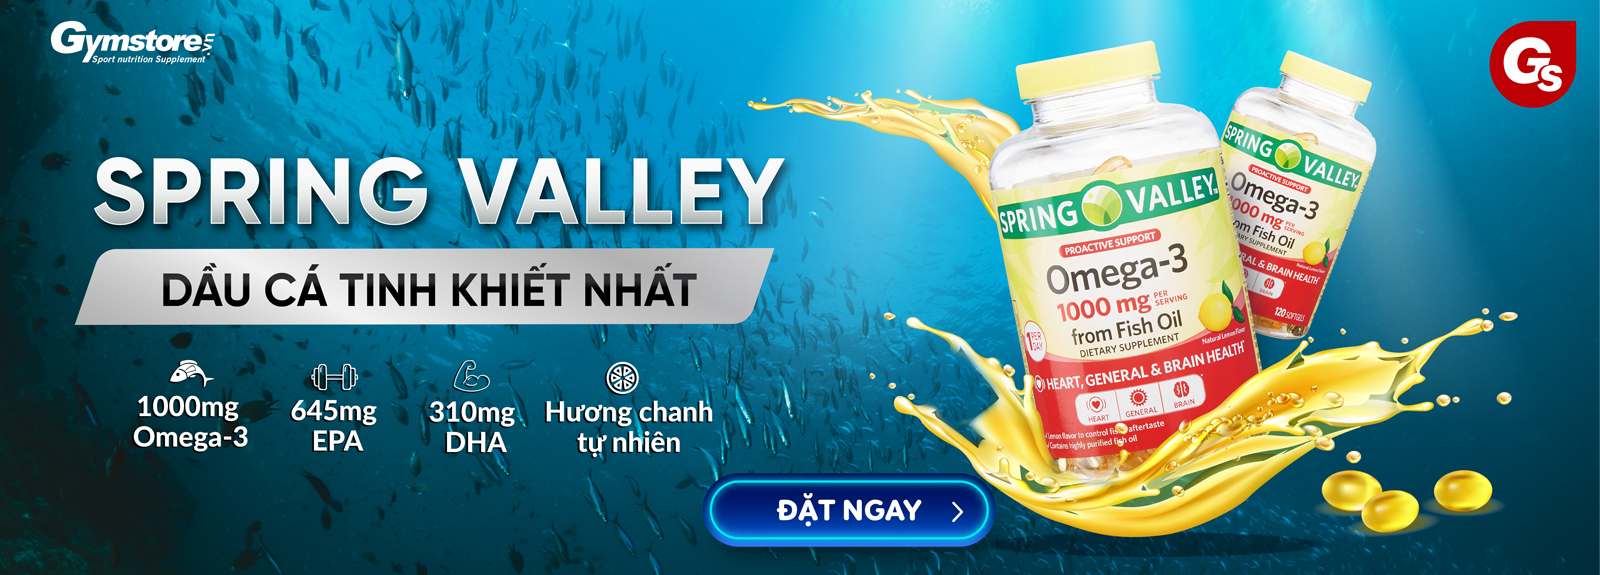 Spring-Valley-Omega3-dau-ca-ham-luong-cao-gia-tot-gymstore